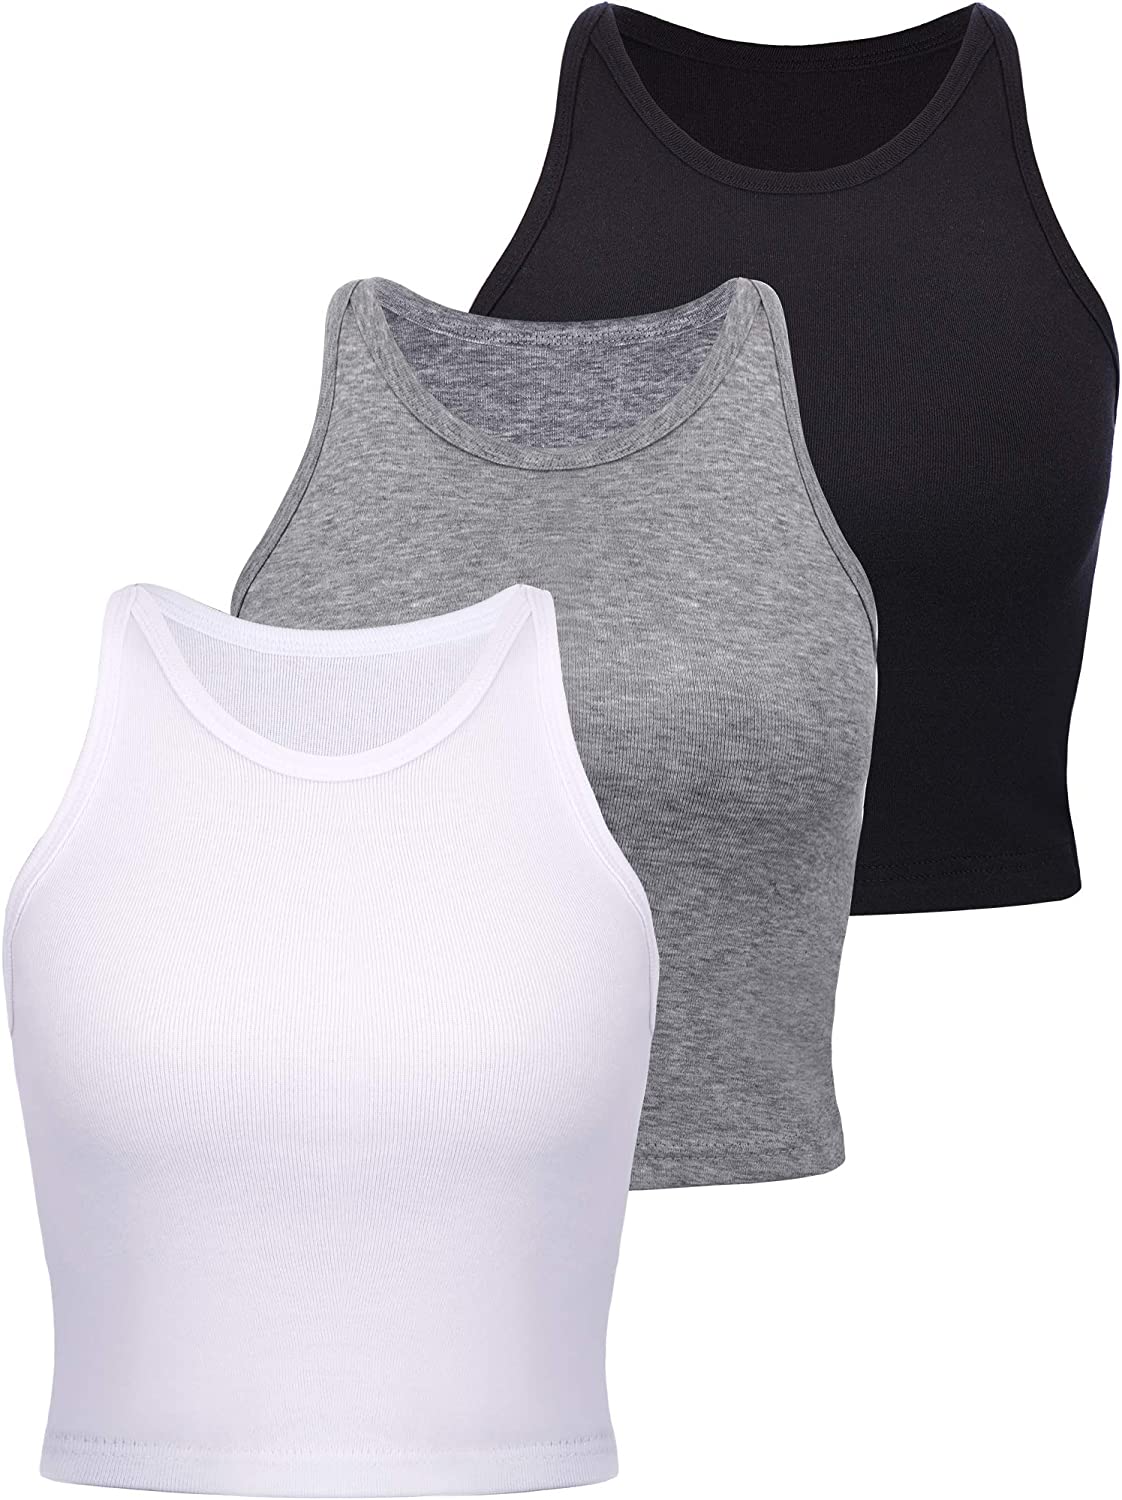 3 Pieces Women's Cotton Basic Sleeveless Racerback Crop Tank Top Sports Crop Top for Lady Girls Daily Wearing